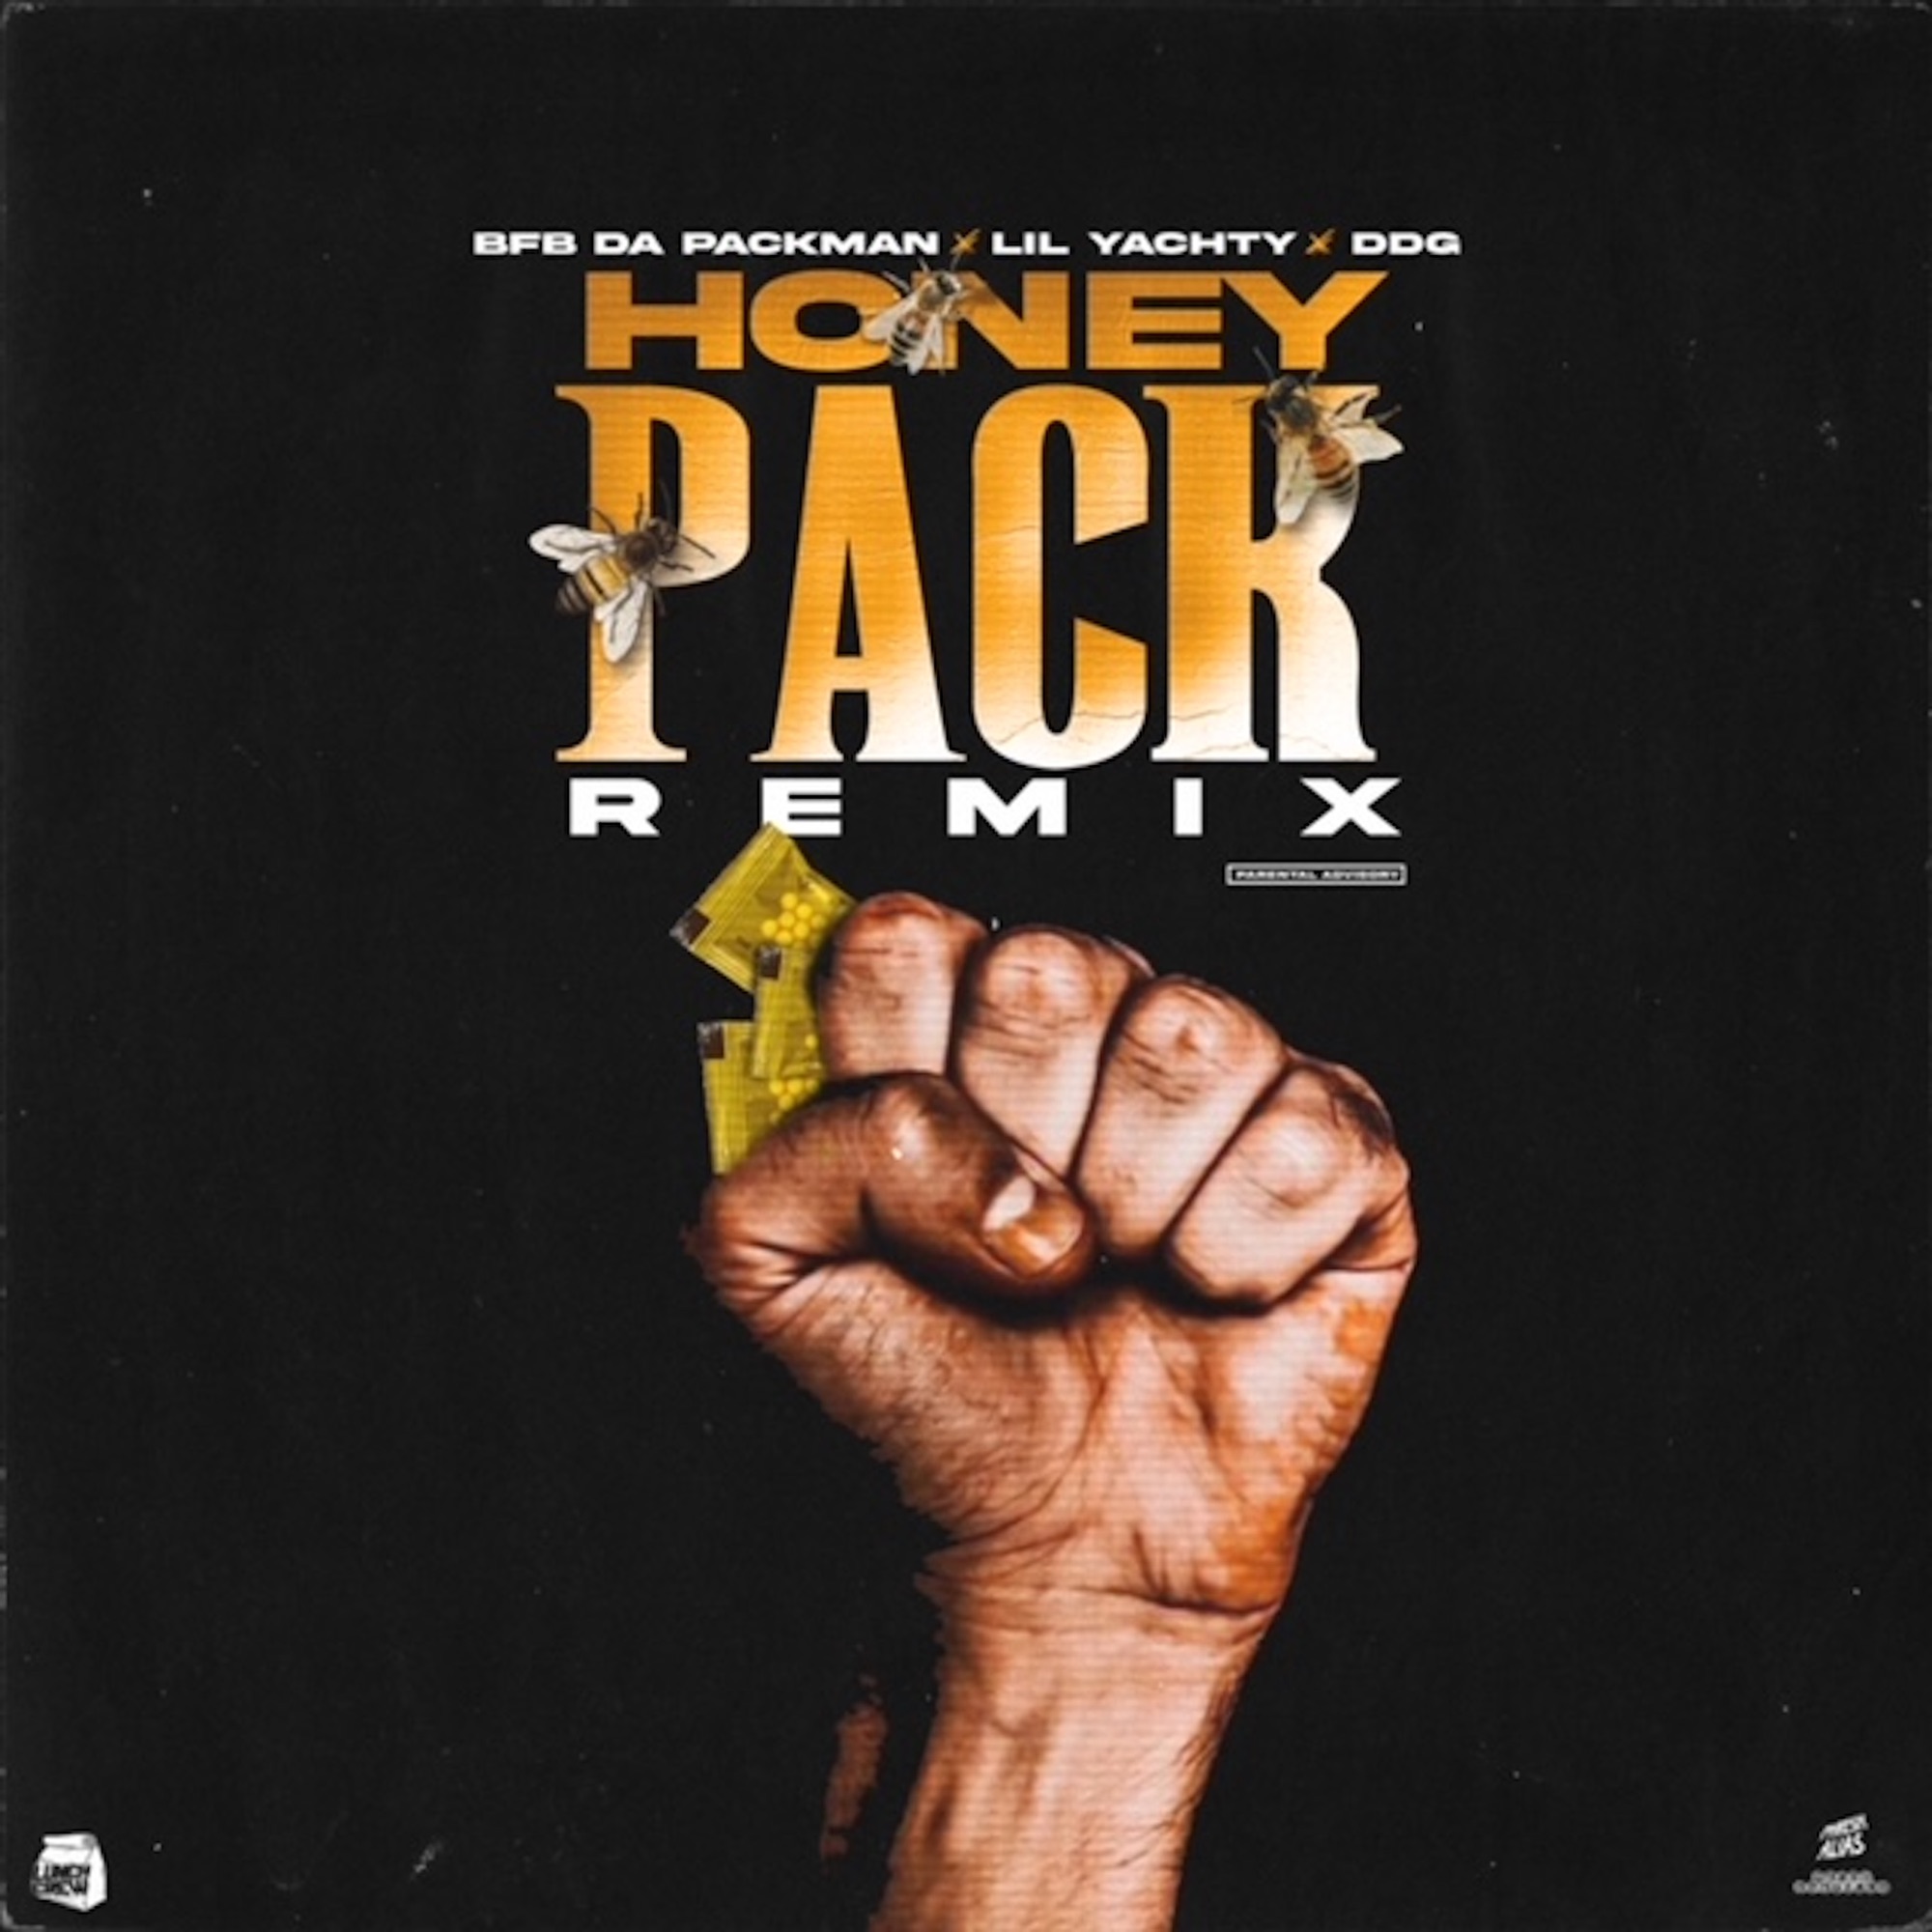 Bfb Da Packman - Honey Pack (feat. Lil Yachty & DDG) - Single